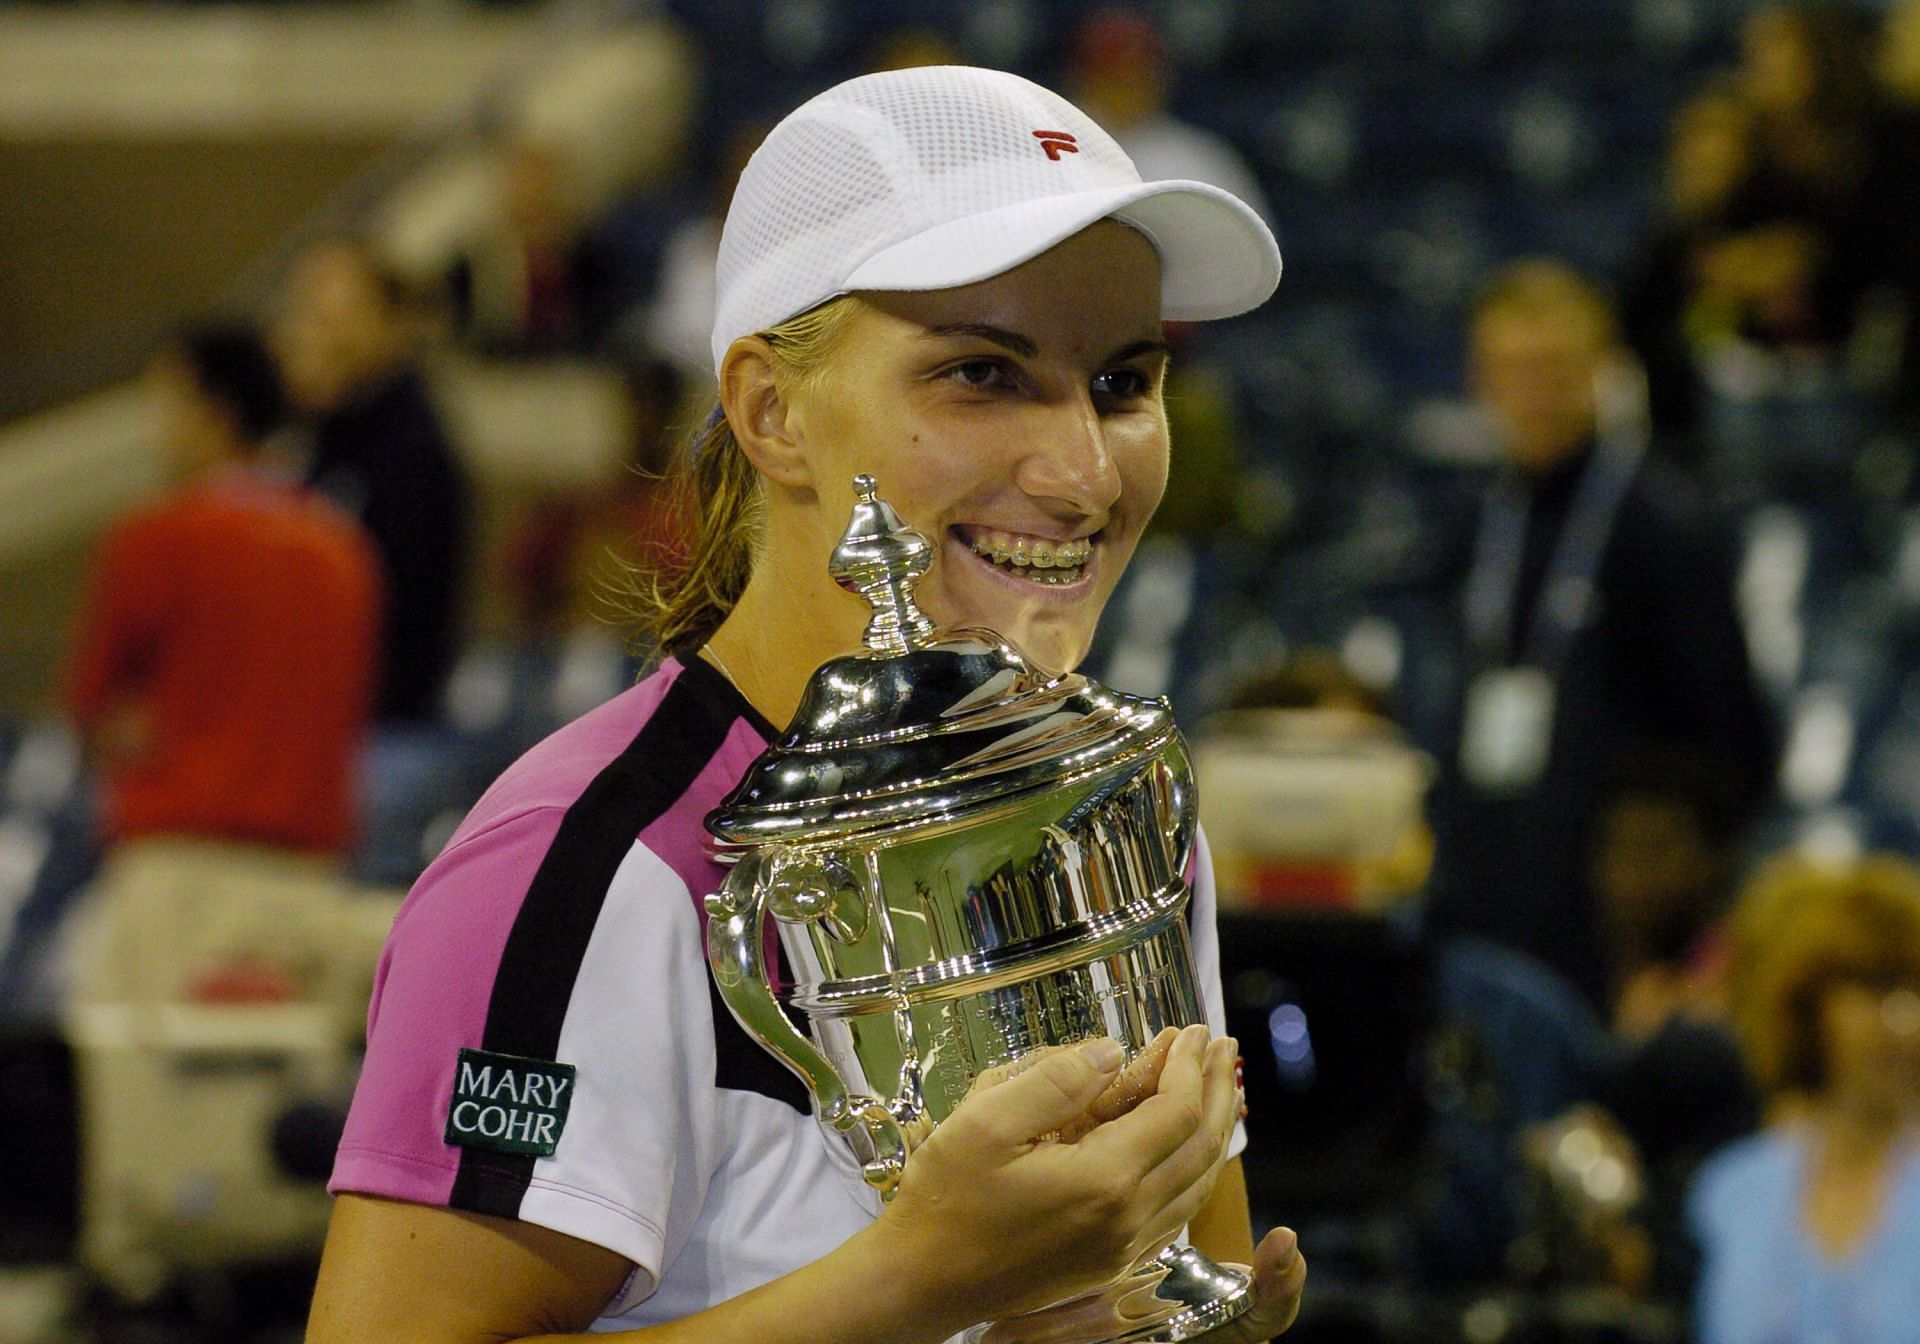 The top 10 youngest female Grand Slam winners